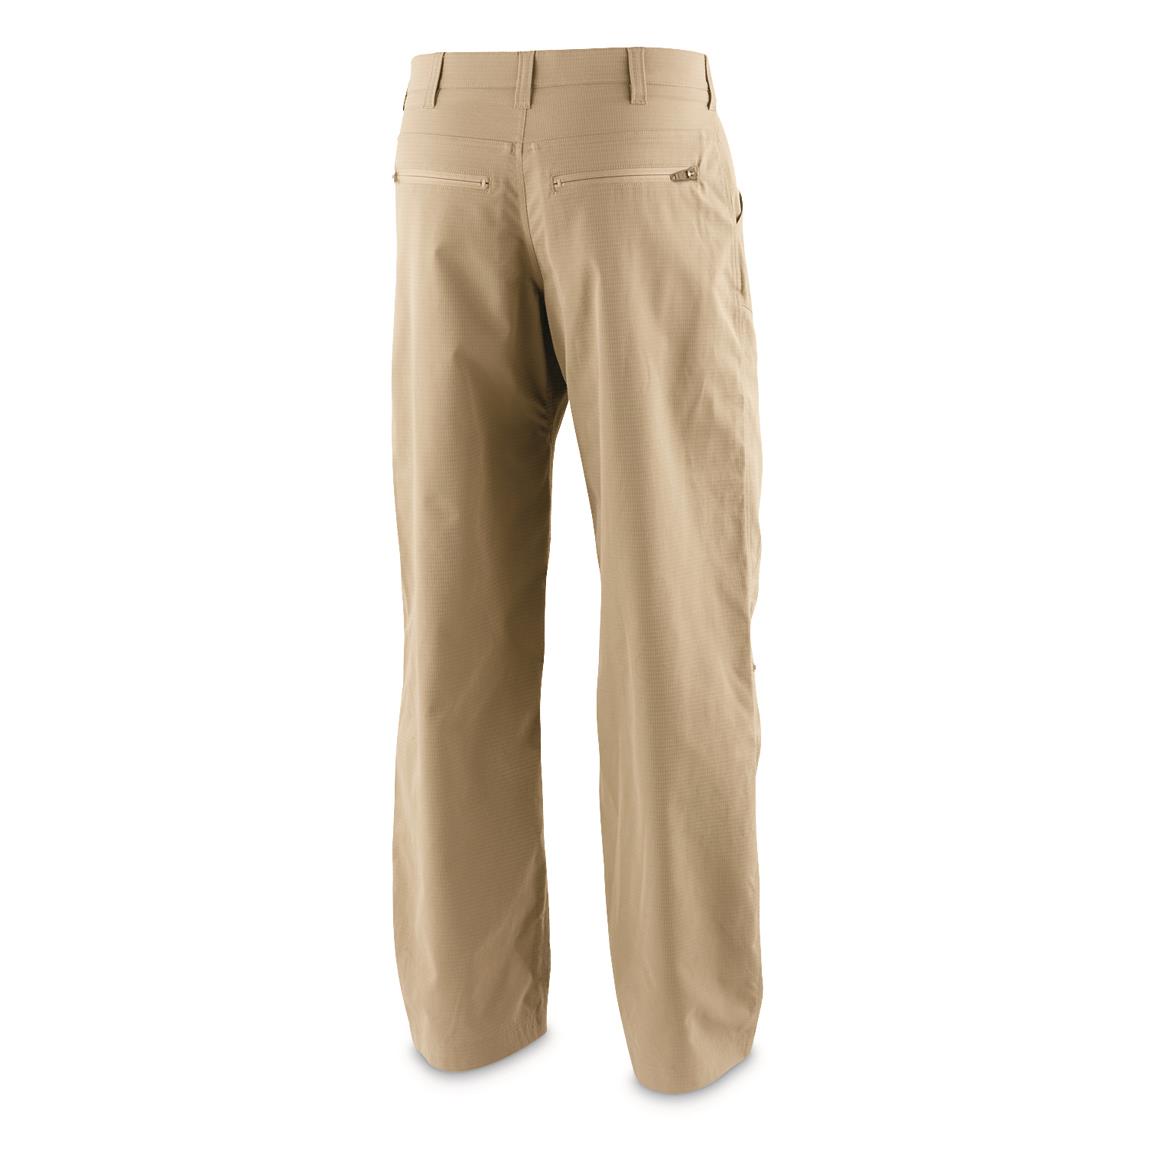 GUIDE GEAR Jeans & Pants, Men's Clothing & Outerwear, Clothing